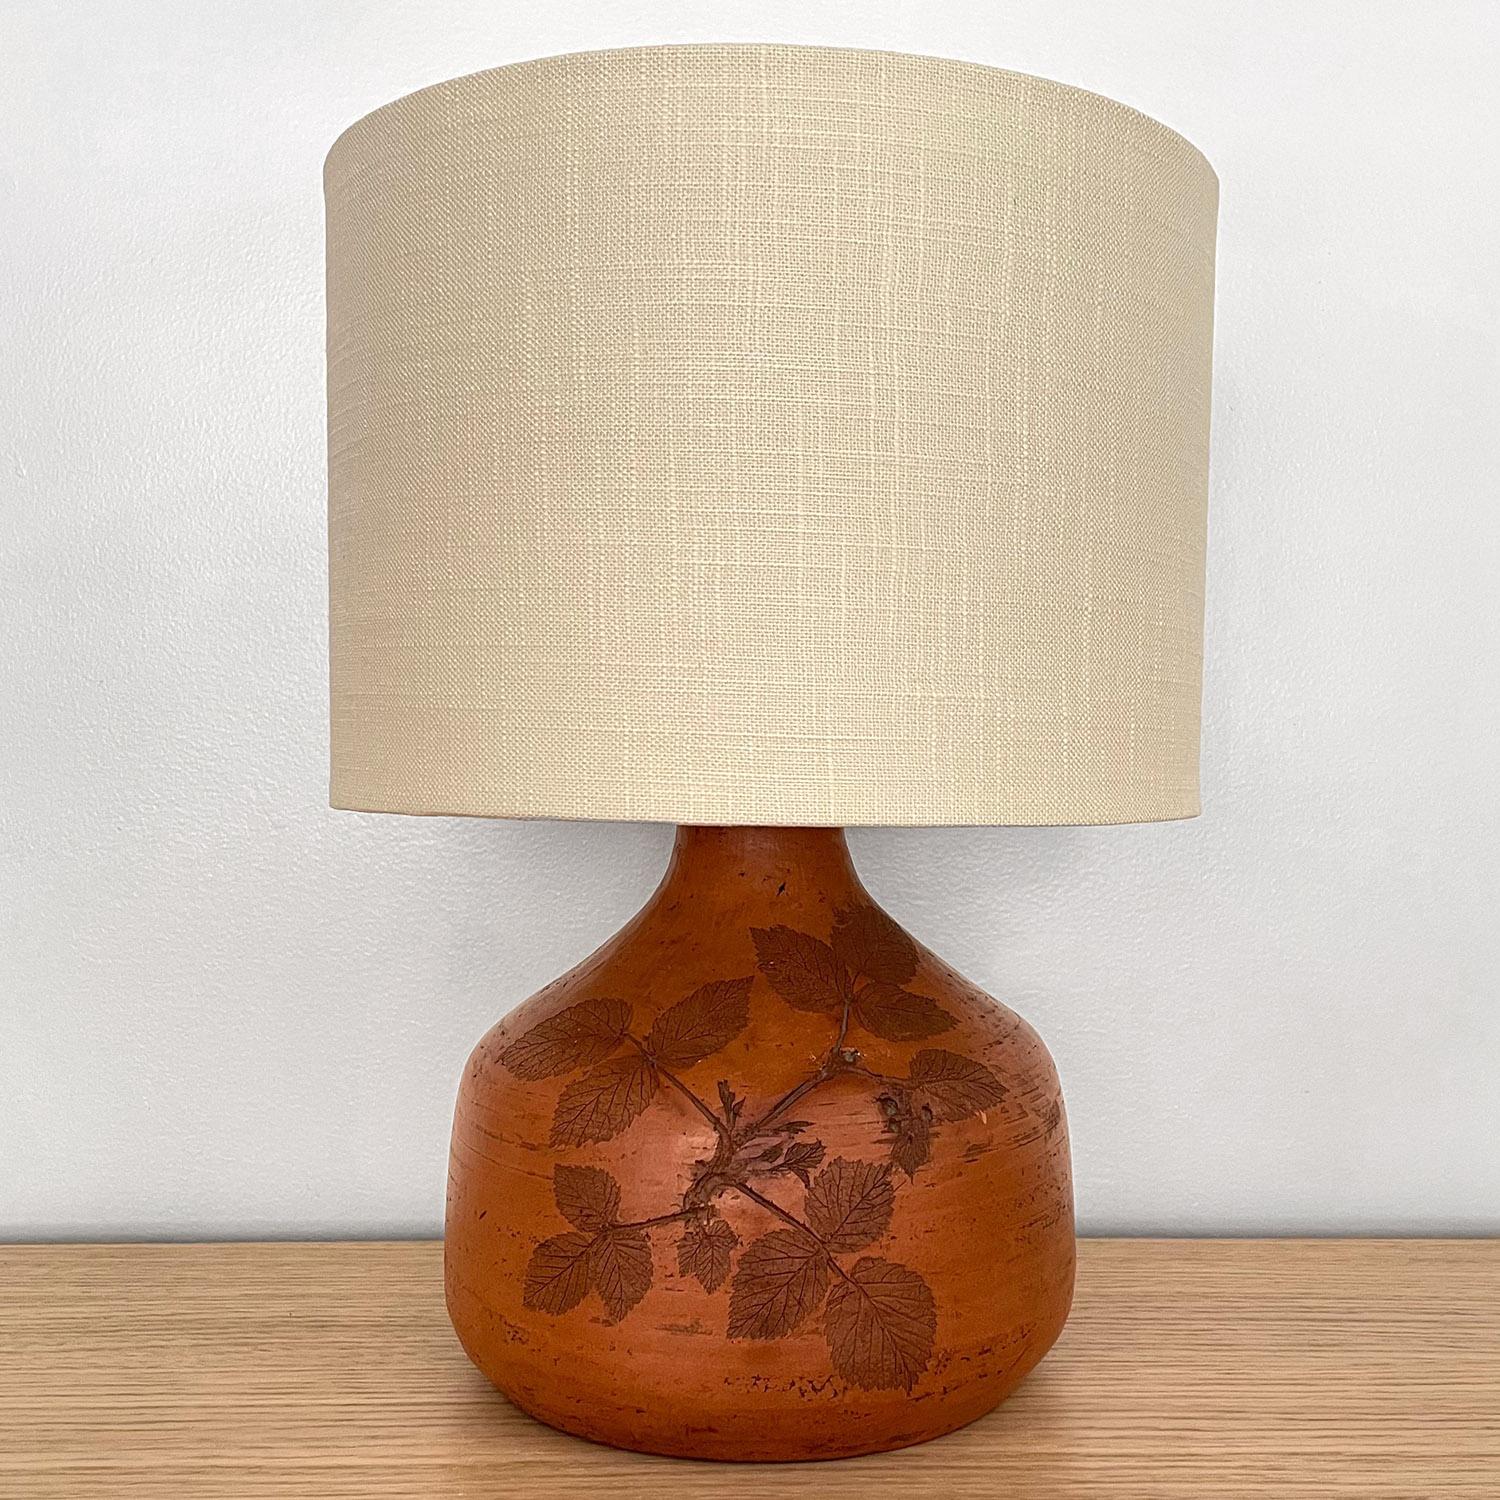 French terracotta table lamp
France, circa 1970s
Floral fossil imprints adorn the terracotta lamp base
Beautifully preserved moment in time
Patina from age and use
New linen shade with diffuser
Newly rewired
Single socket medium base.